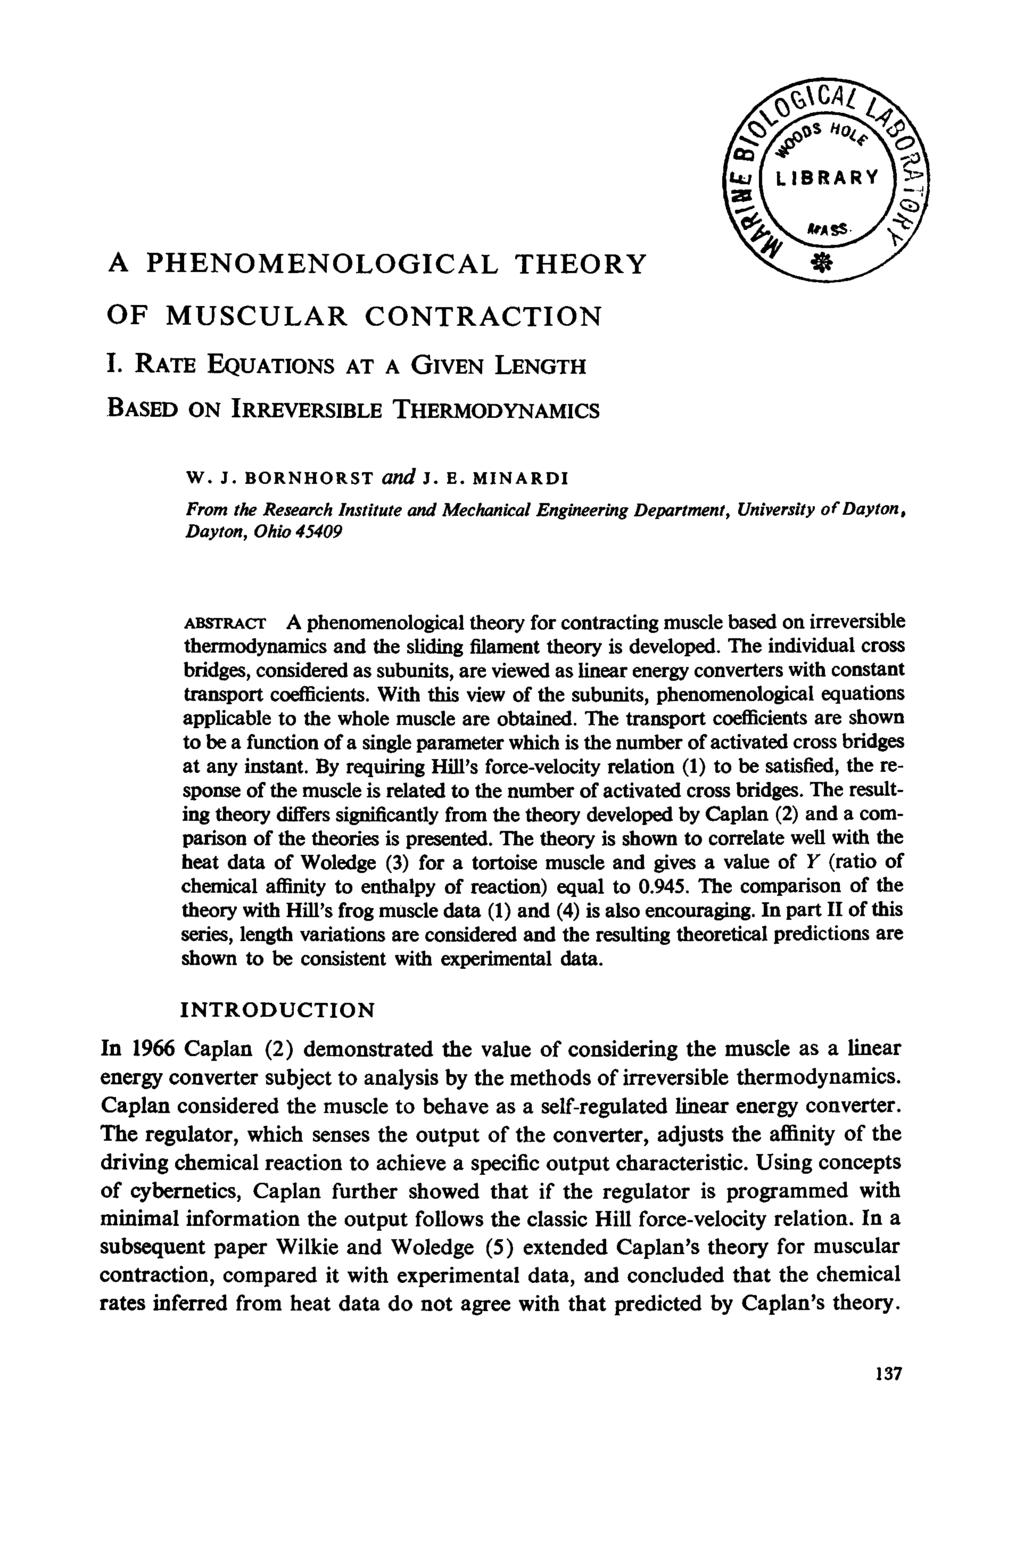 A PHENOMENOLOGICAL THEORY OF MUSCULAR CONTRACTION 1. RATE EQ